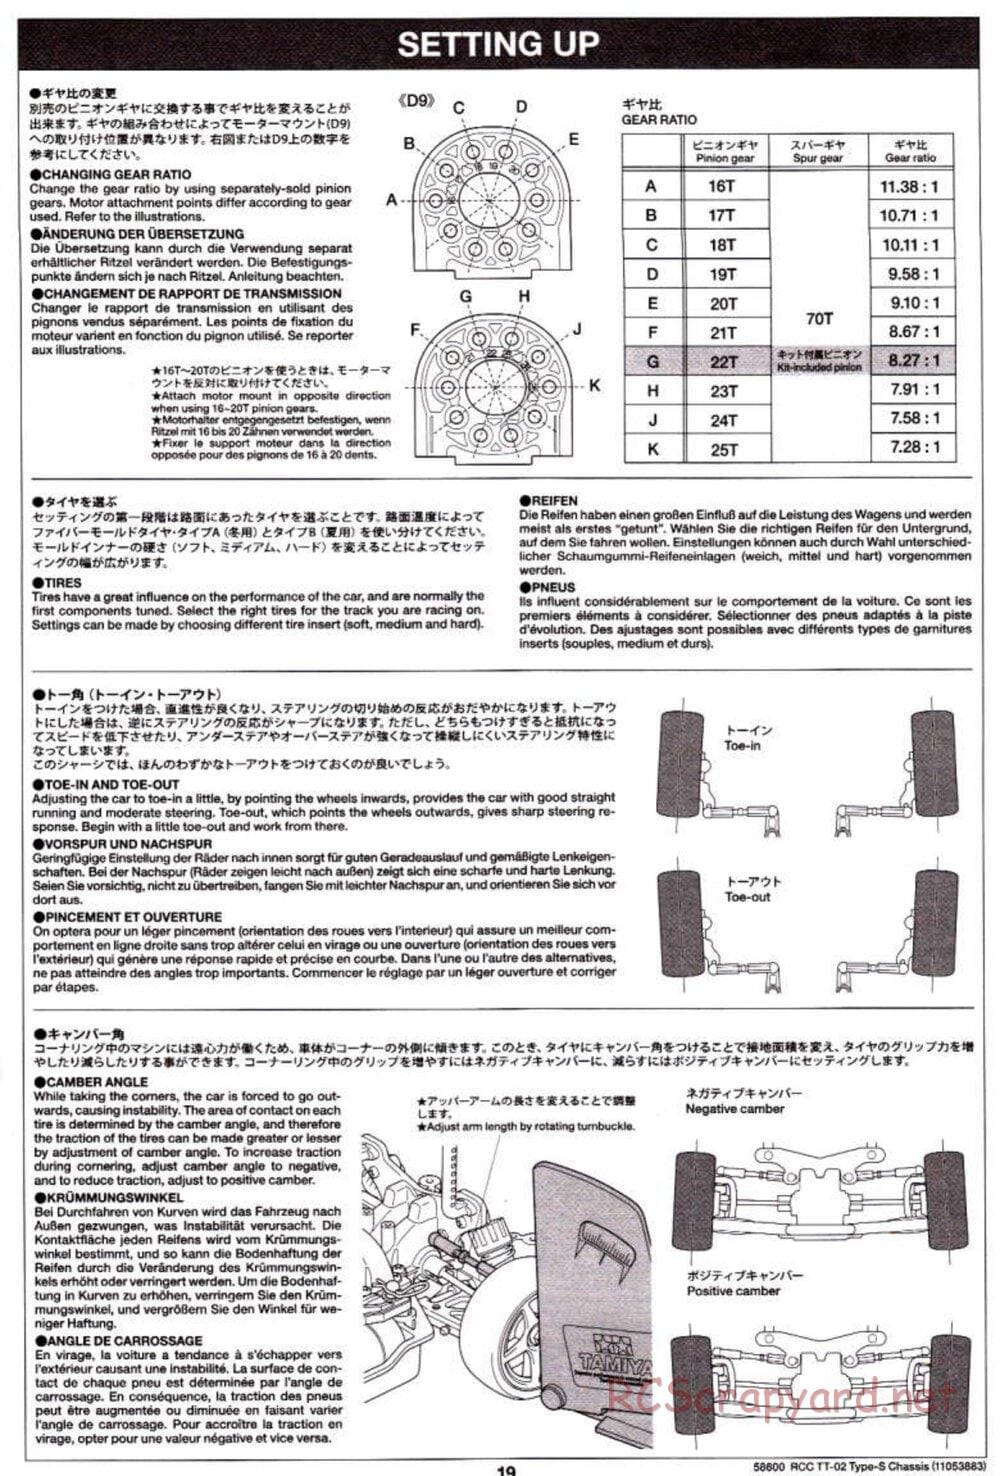 Tamiya - TT-02 Type-S Chassis - Manual - Page 19